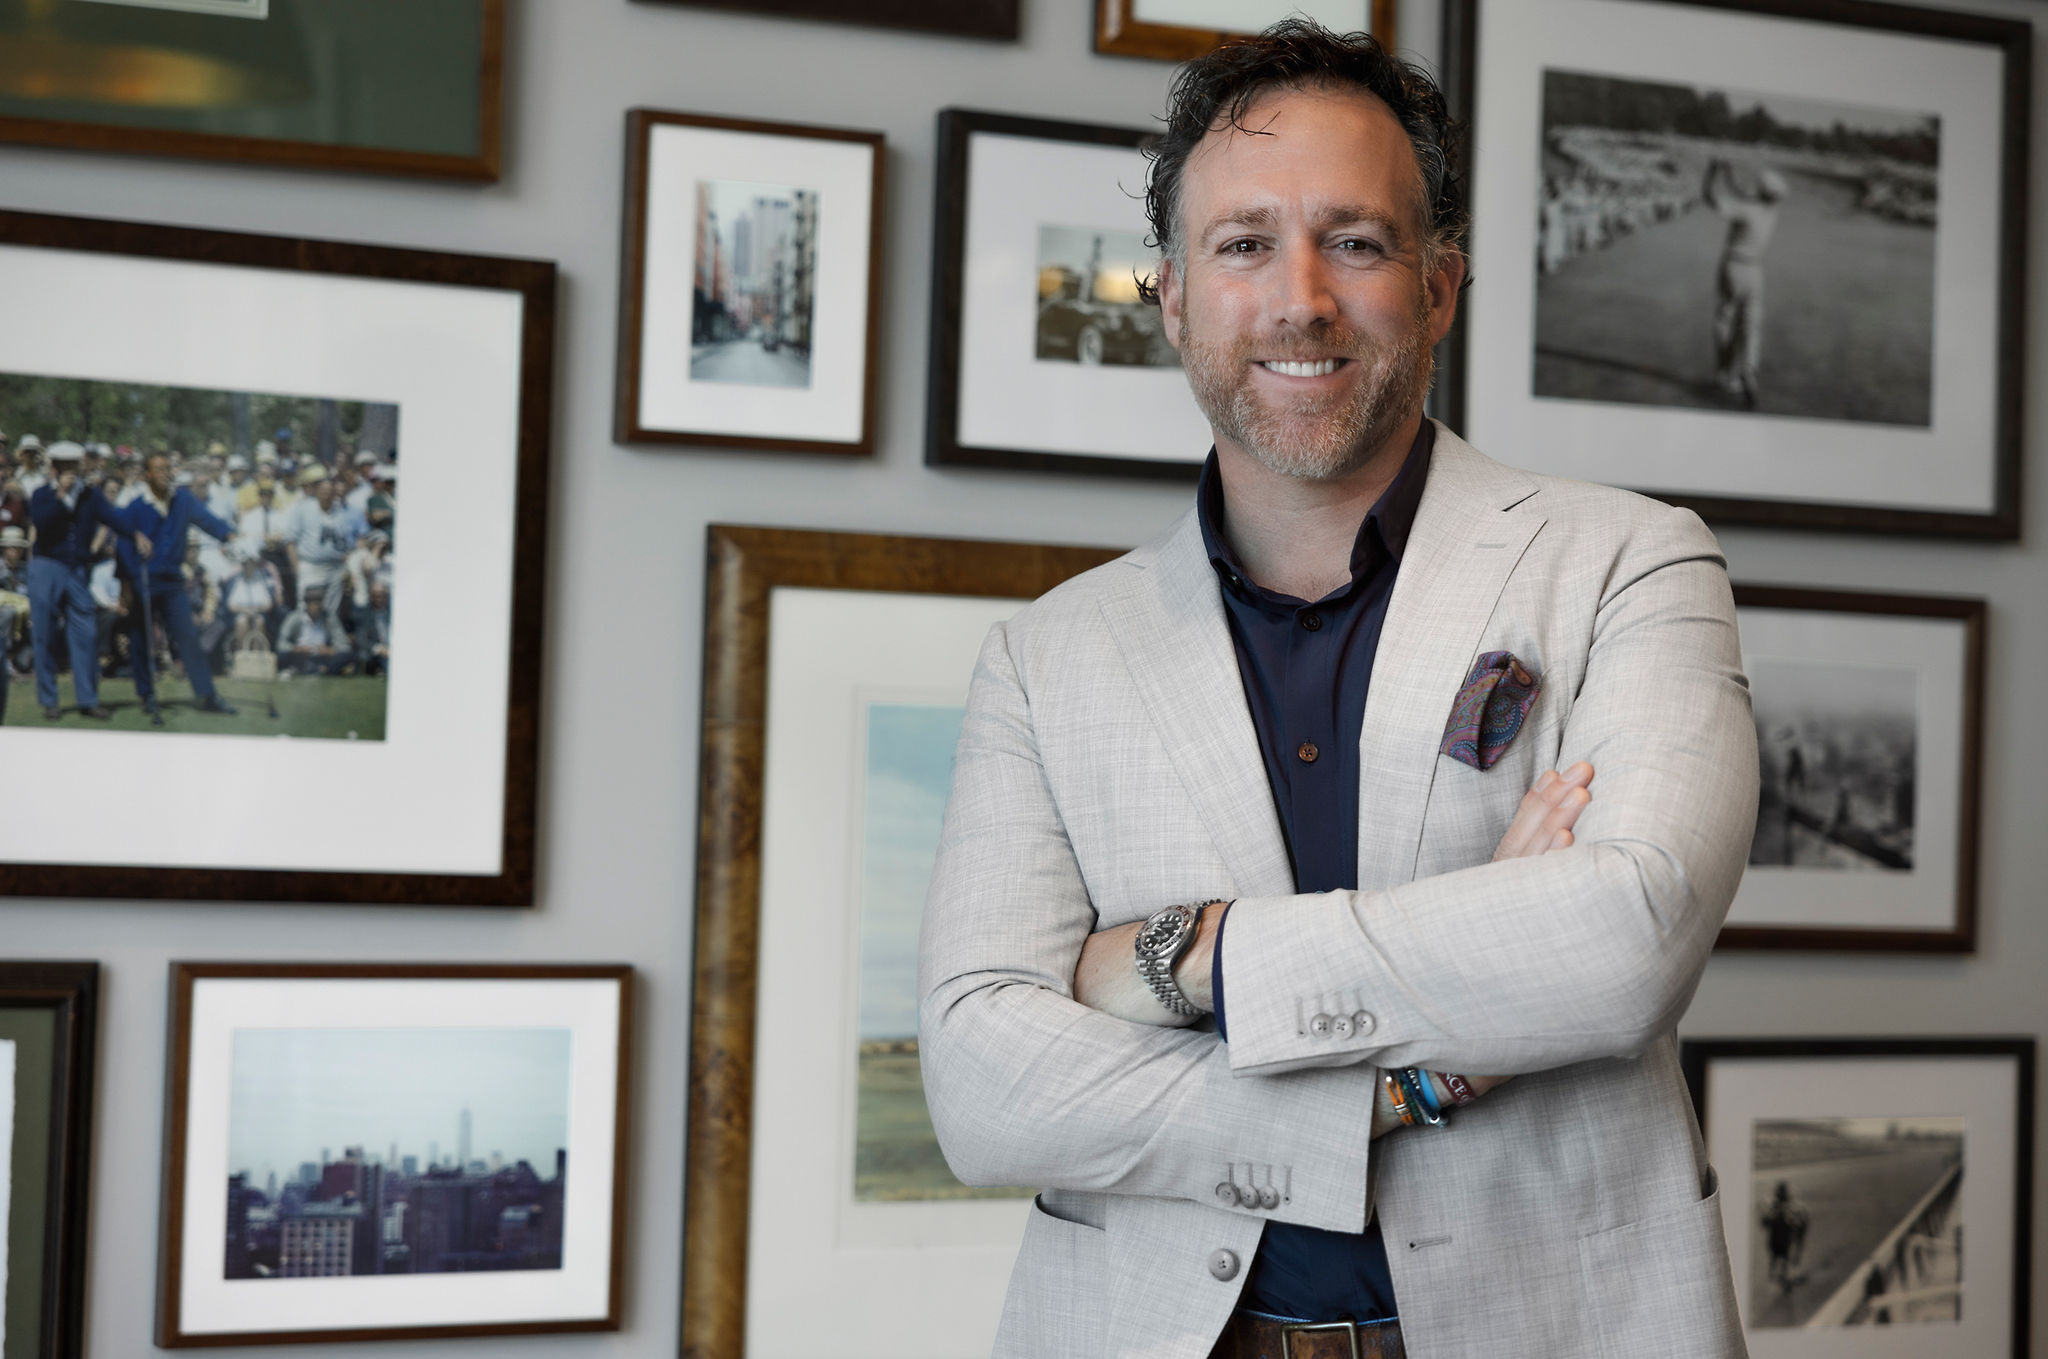 Neiman Marcus CEO: Wealthy shoppers focusing on luxury brands